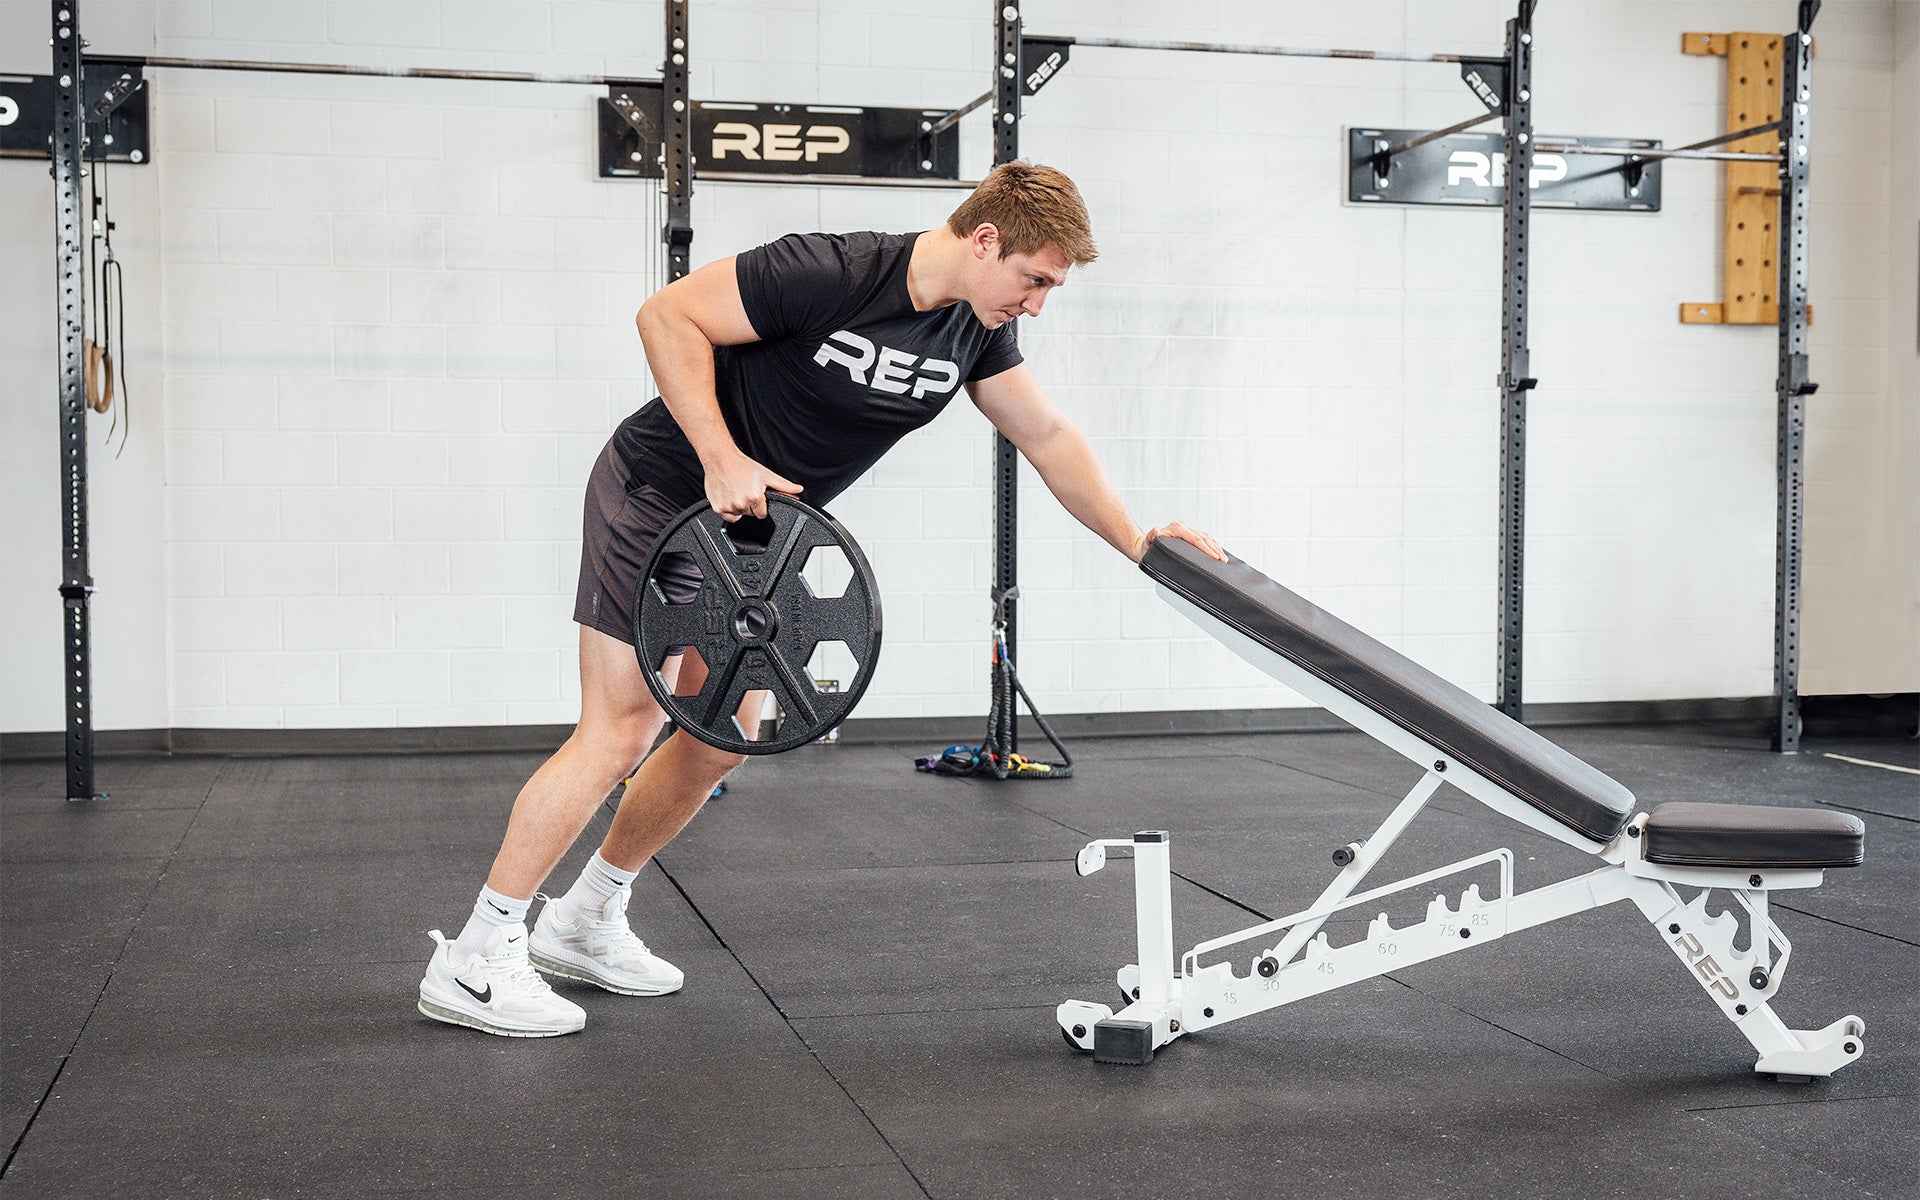 Lifter using a single 45lb USA-Made Equalizer Iron Plate for bent over row.